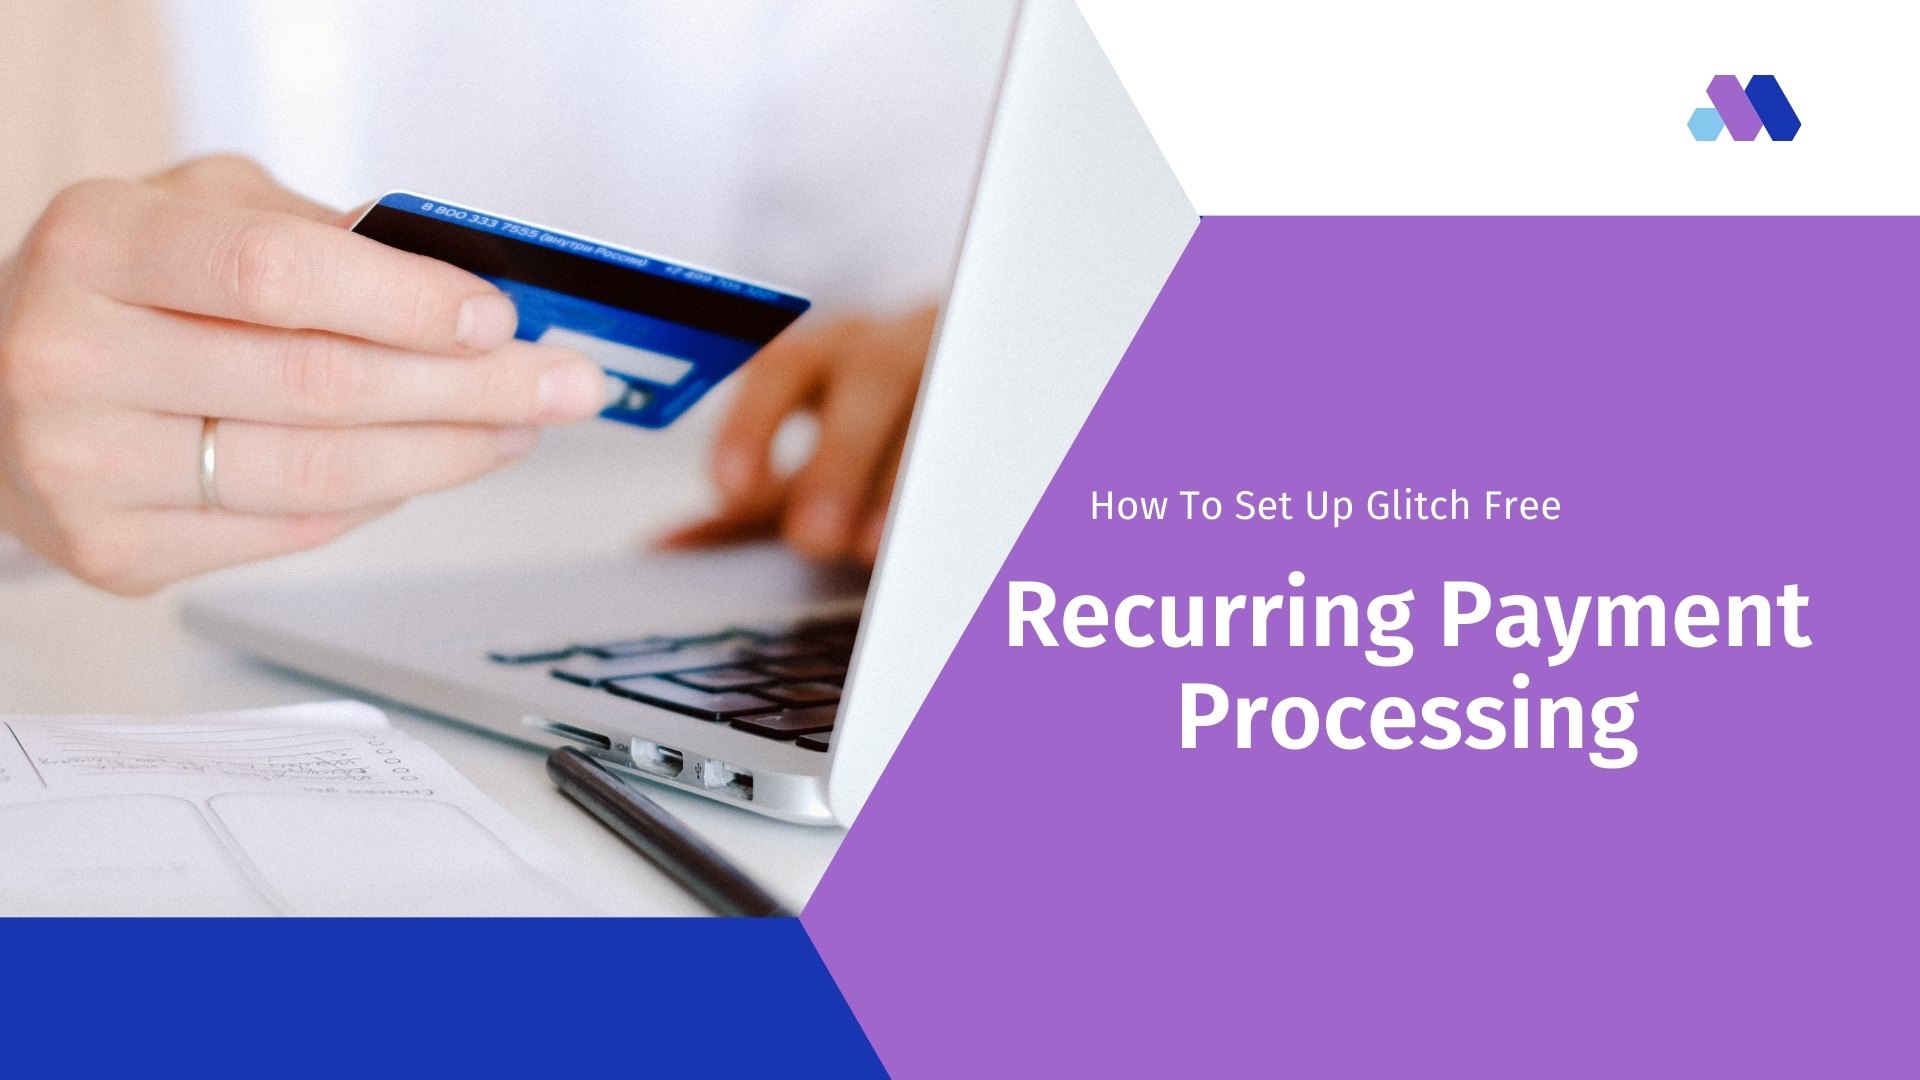 How To Set Up Glitch Free Recurring Payment Processing